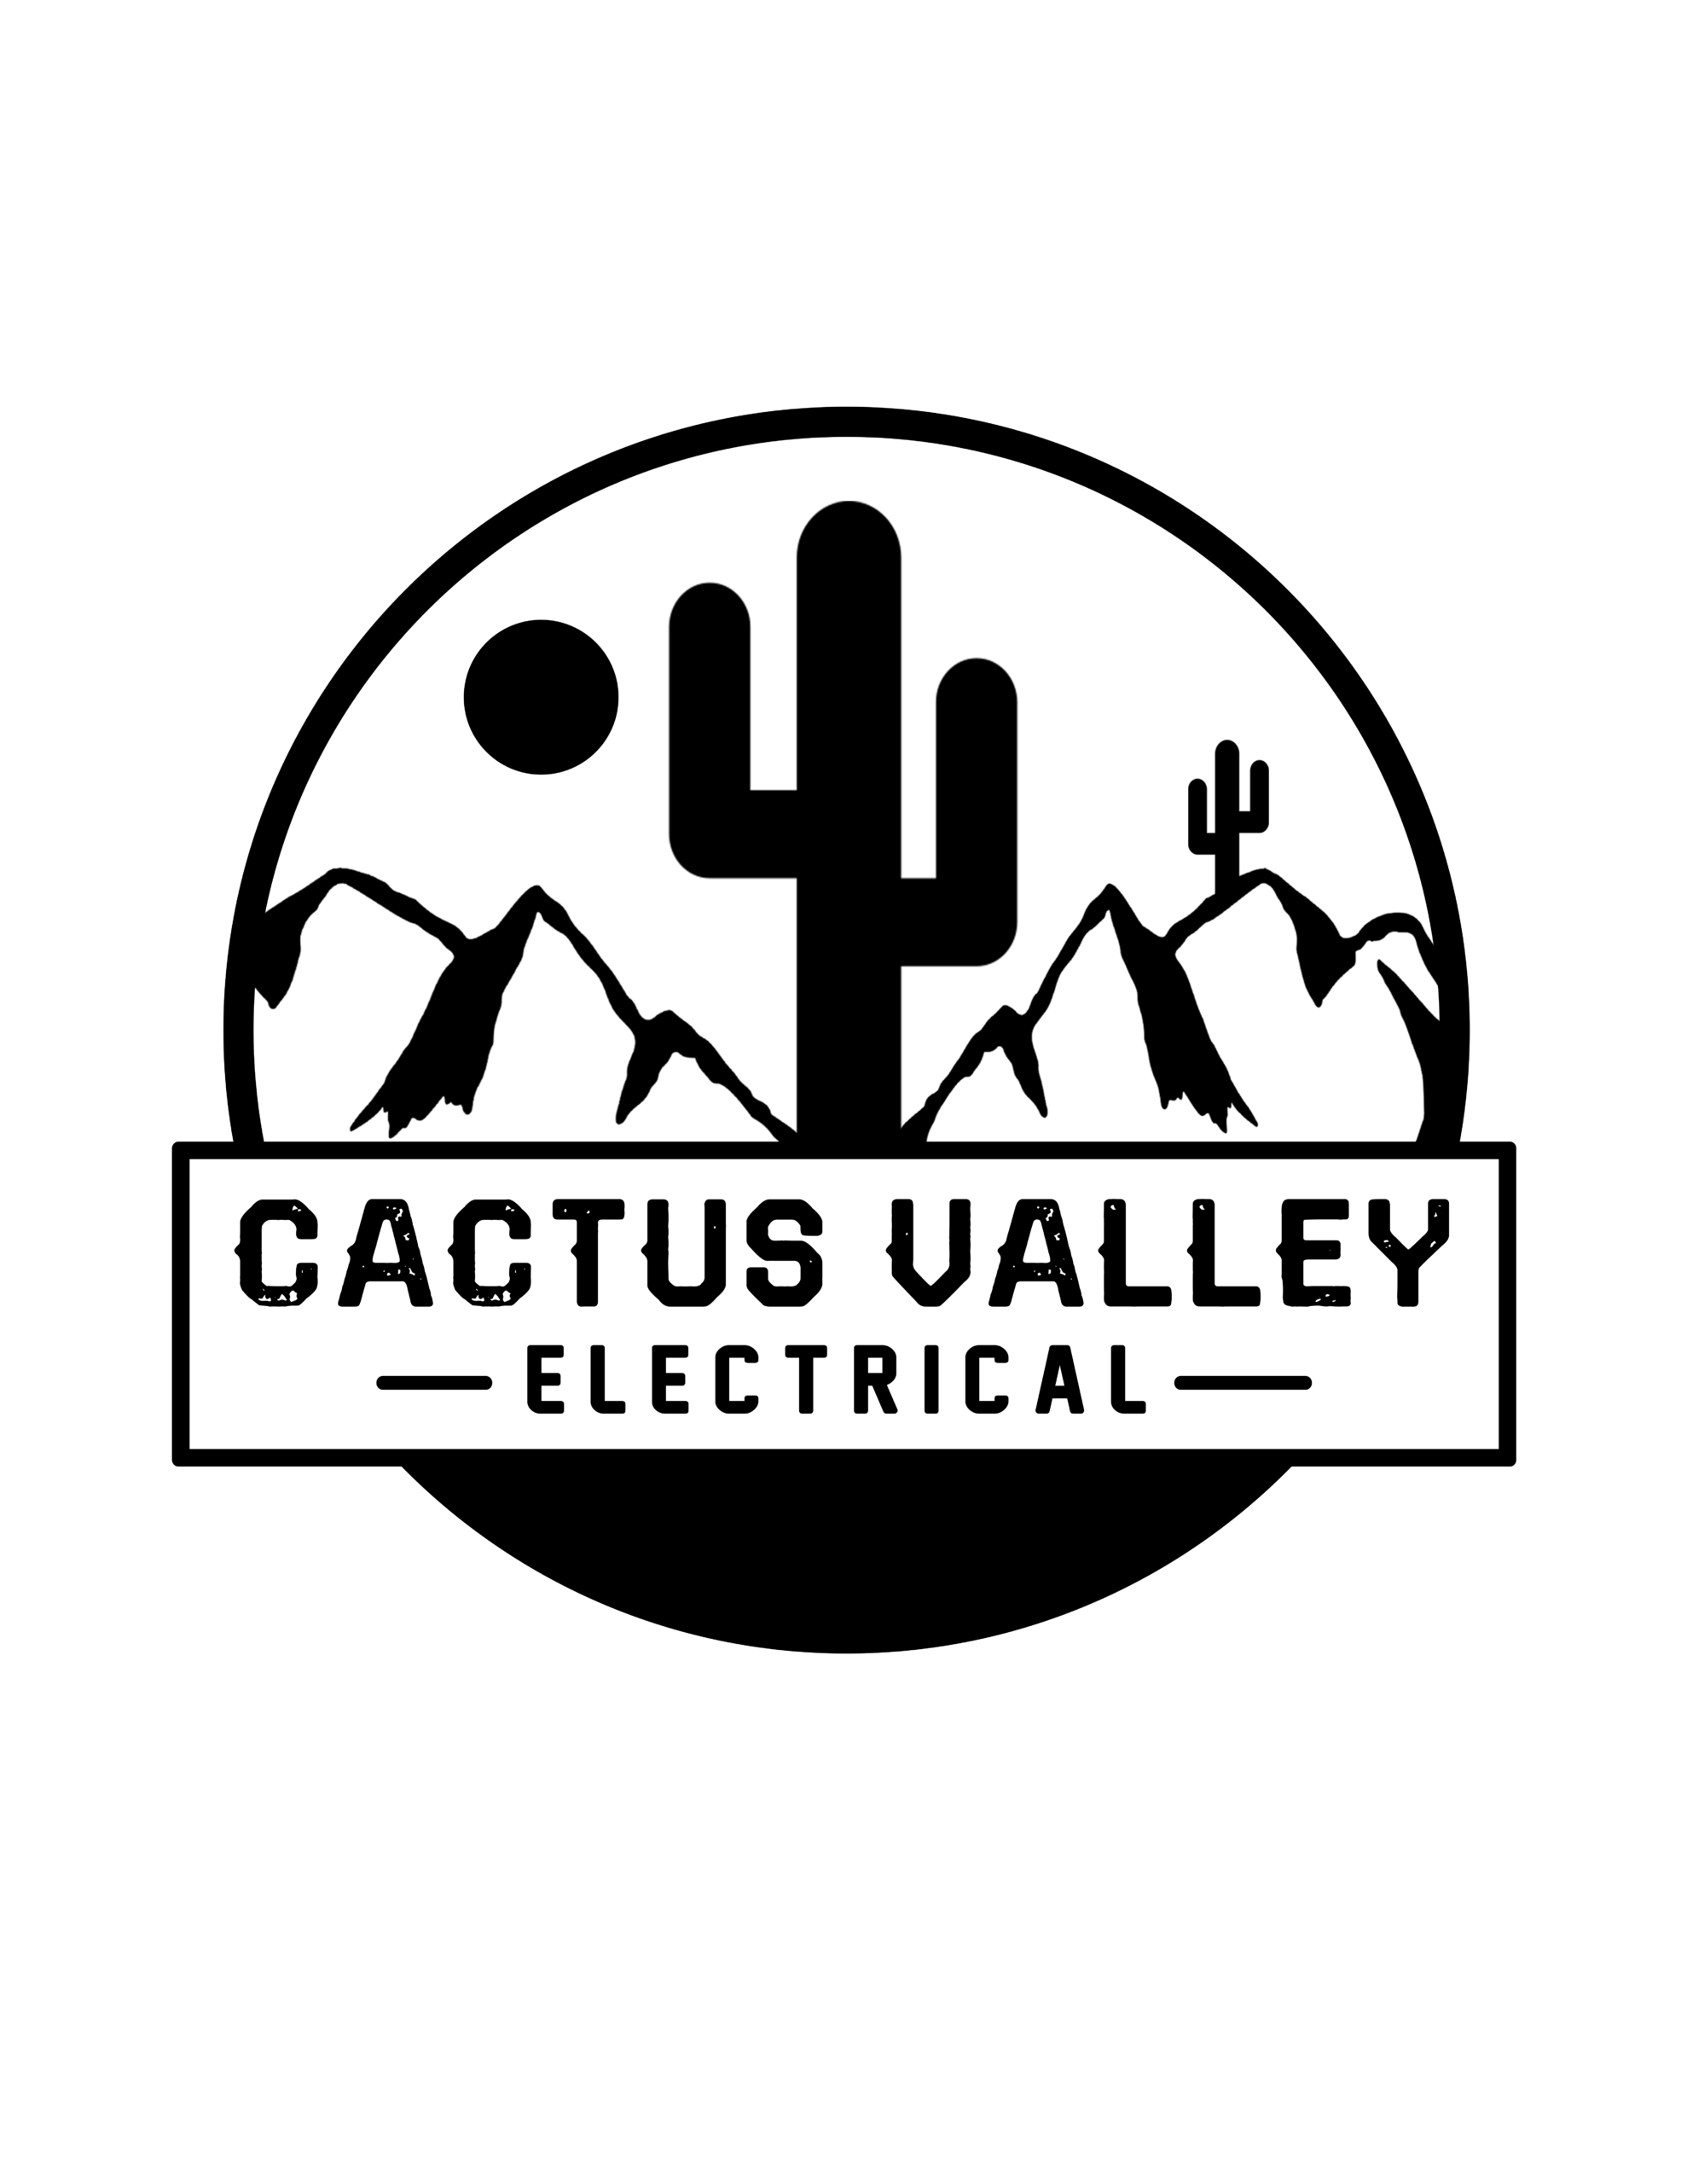 Cactus Valley Electrical